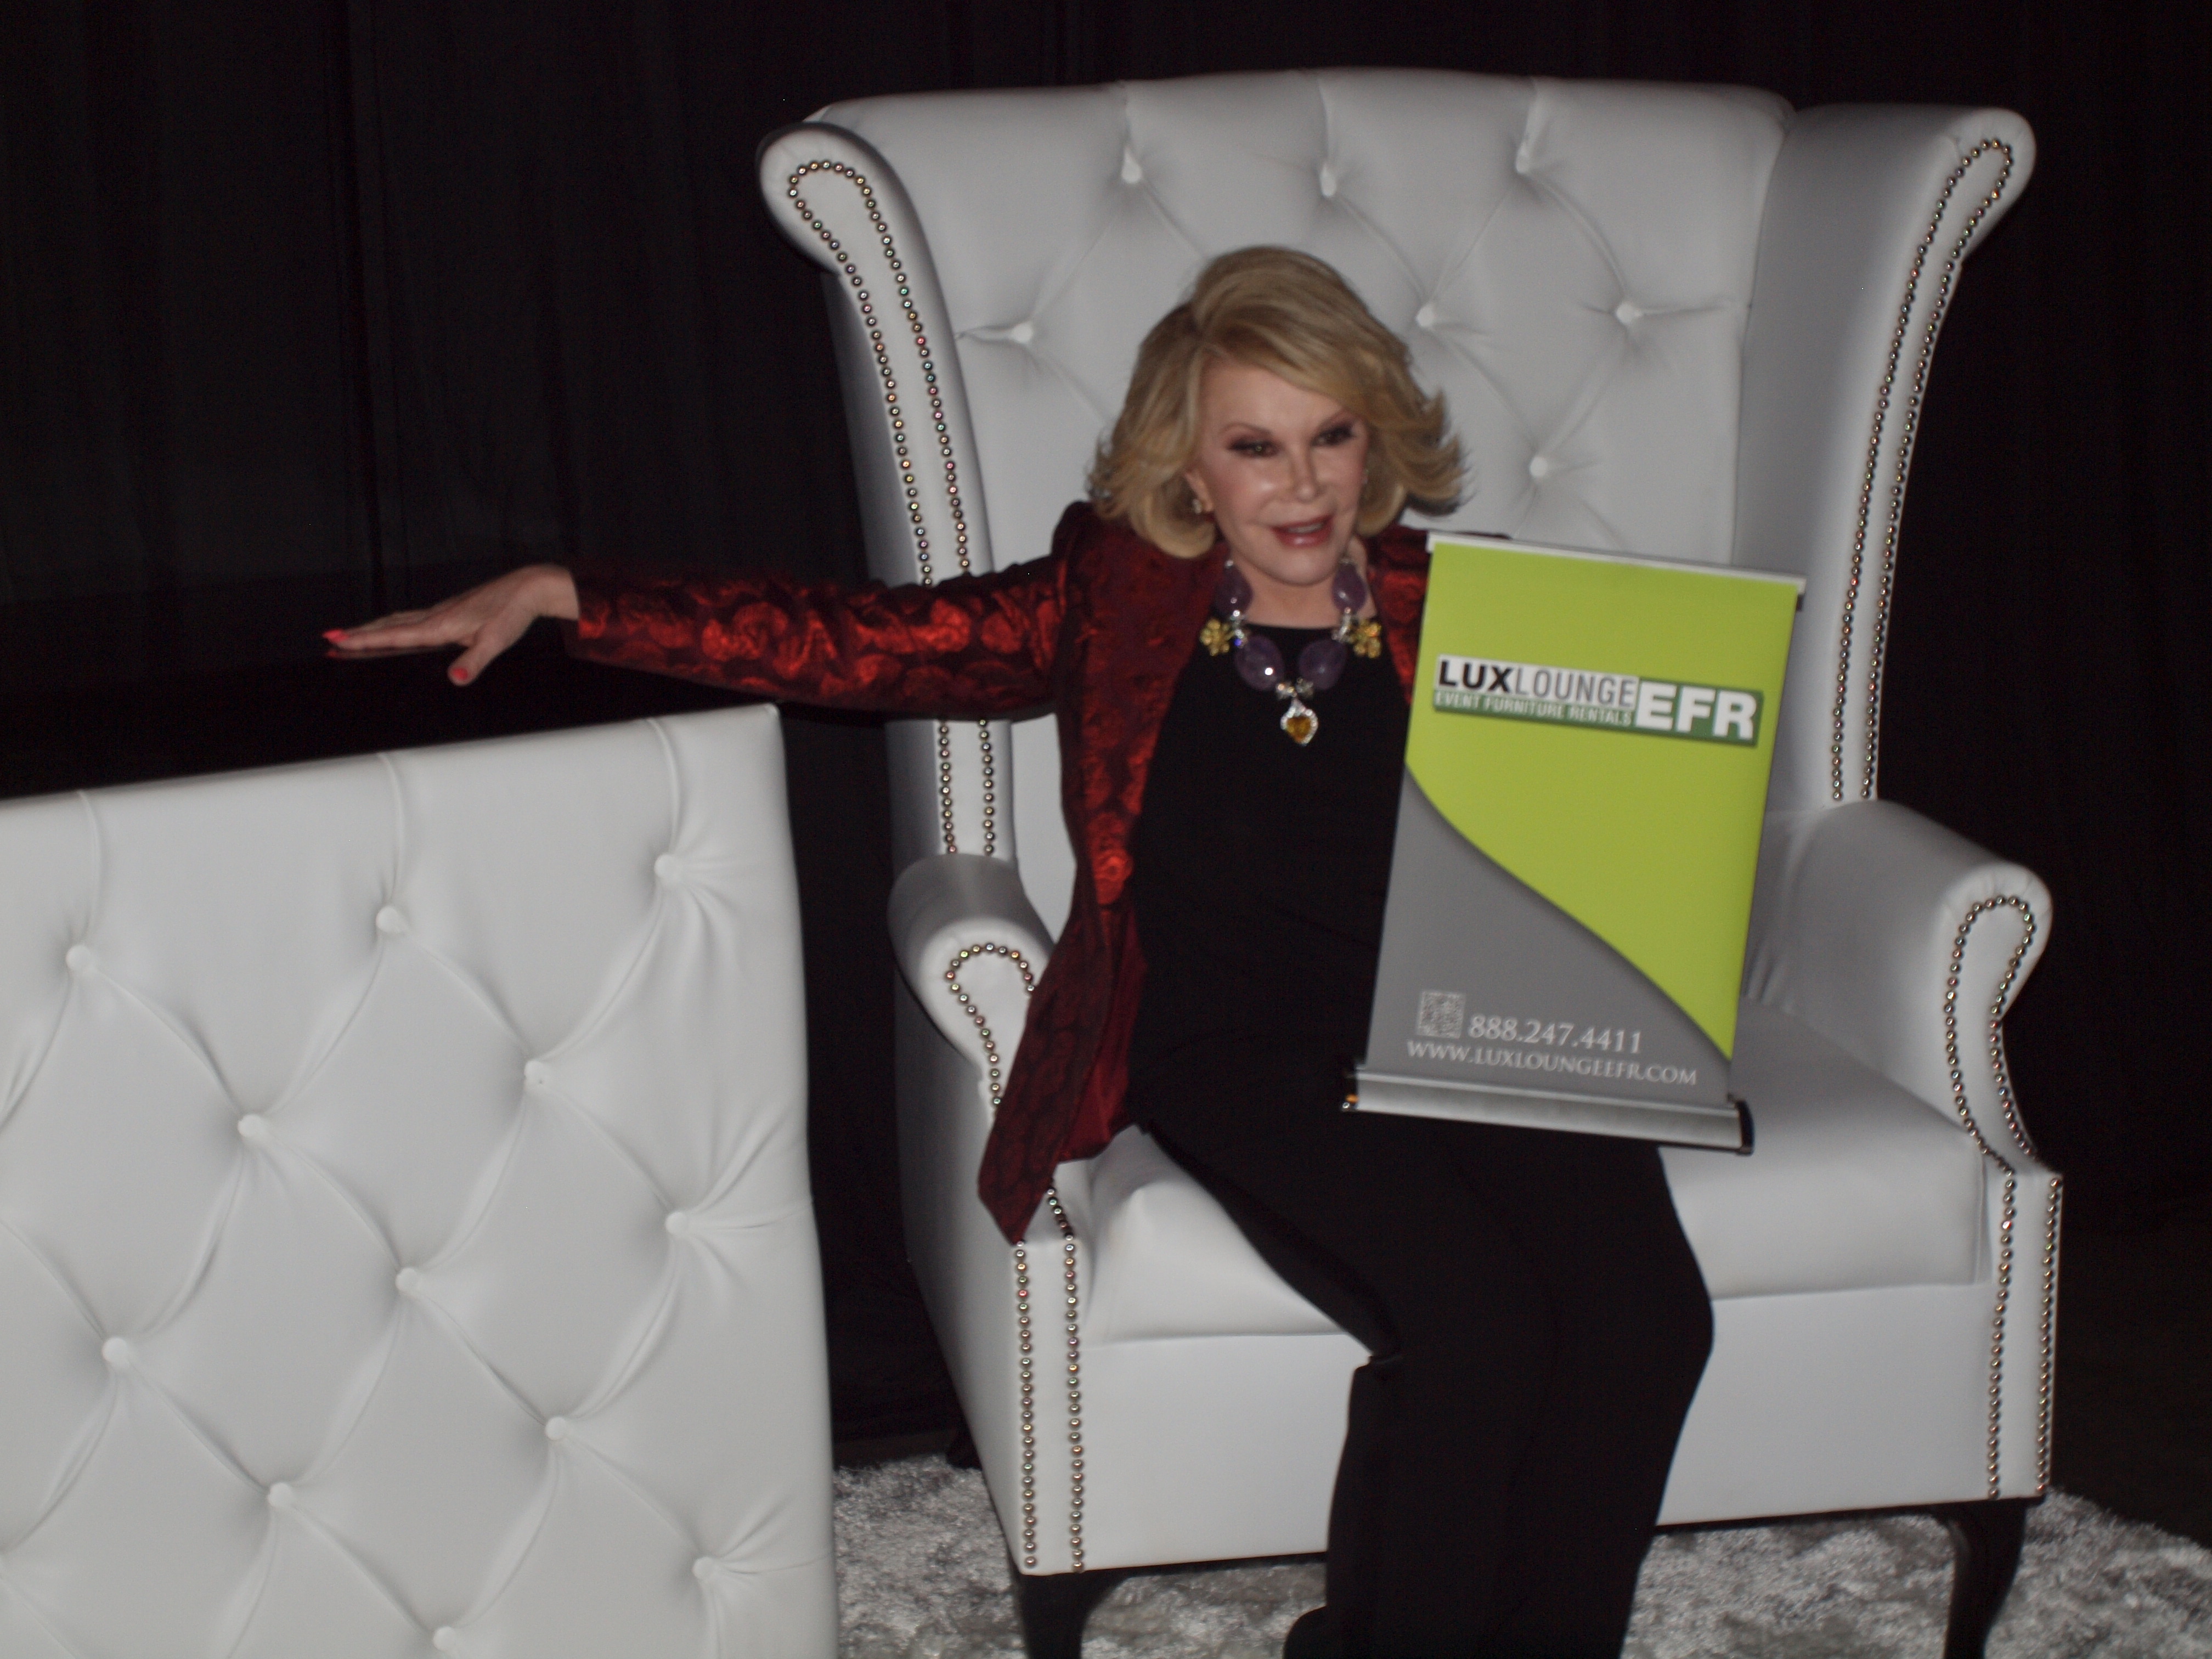 Entertainment Legend Joan Rivers at the Ultimate Woman's Expo, enjoys the custom made leather chair designed Lux Lounge EFR